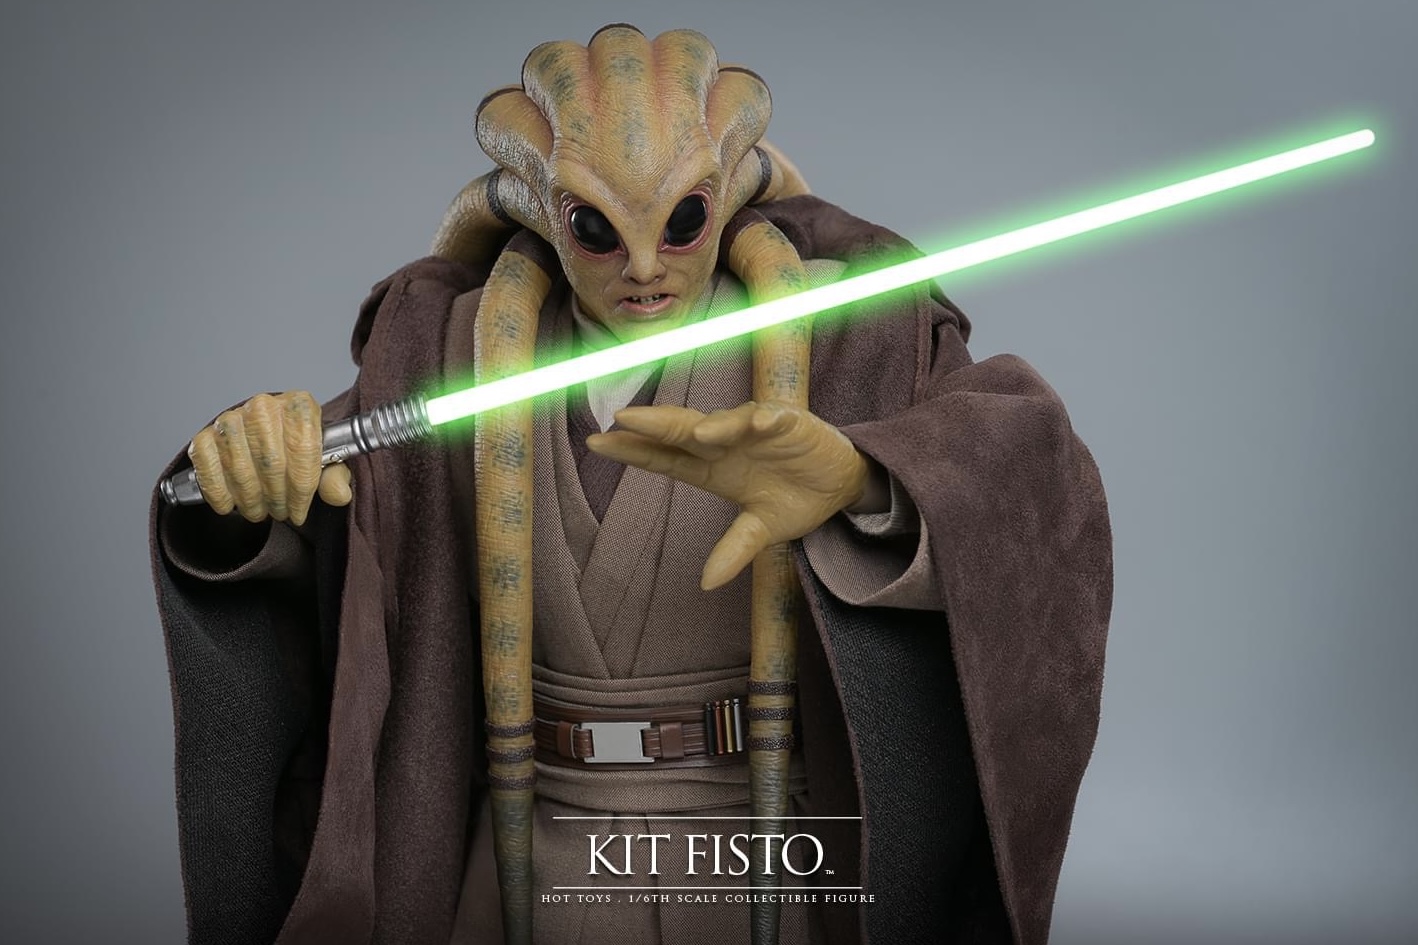 Star Wars Episode III: Revenge of the Sith – Kit Fisto by Hot Toys